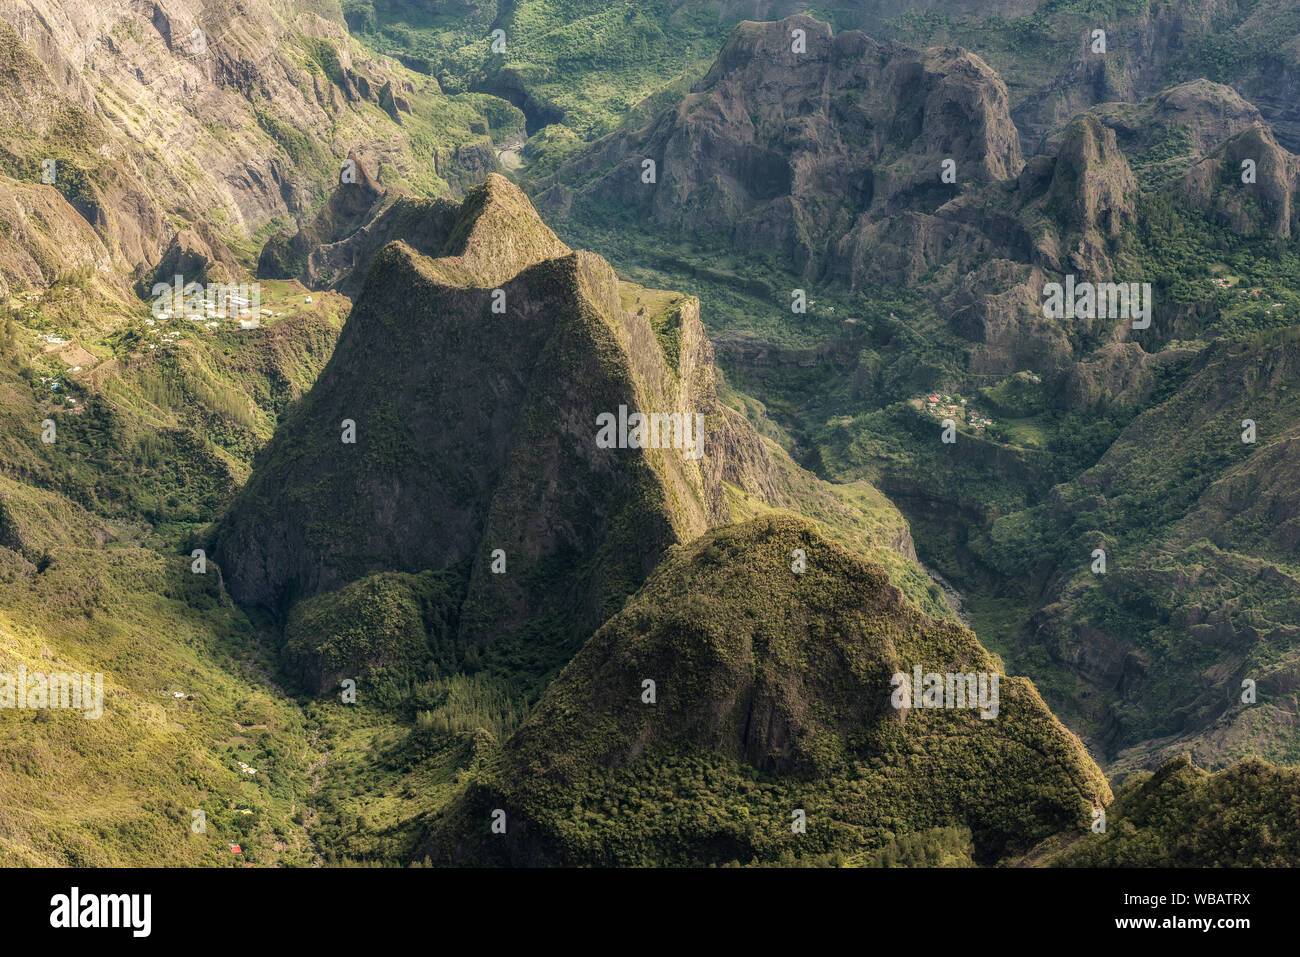 cirque of mafate, highland of the reunion island , view from maïdo summit. Stock Photo